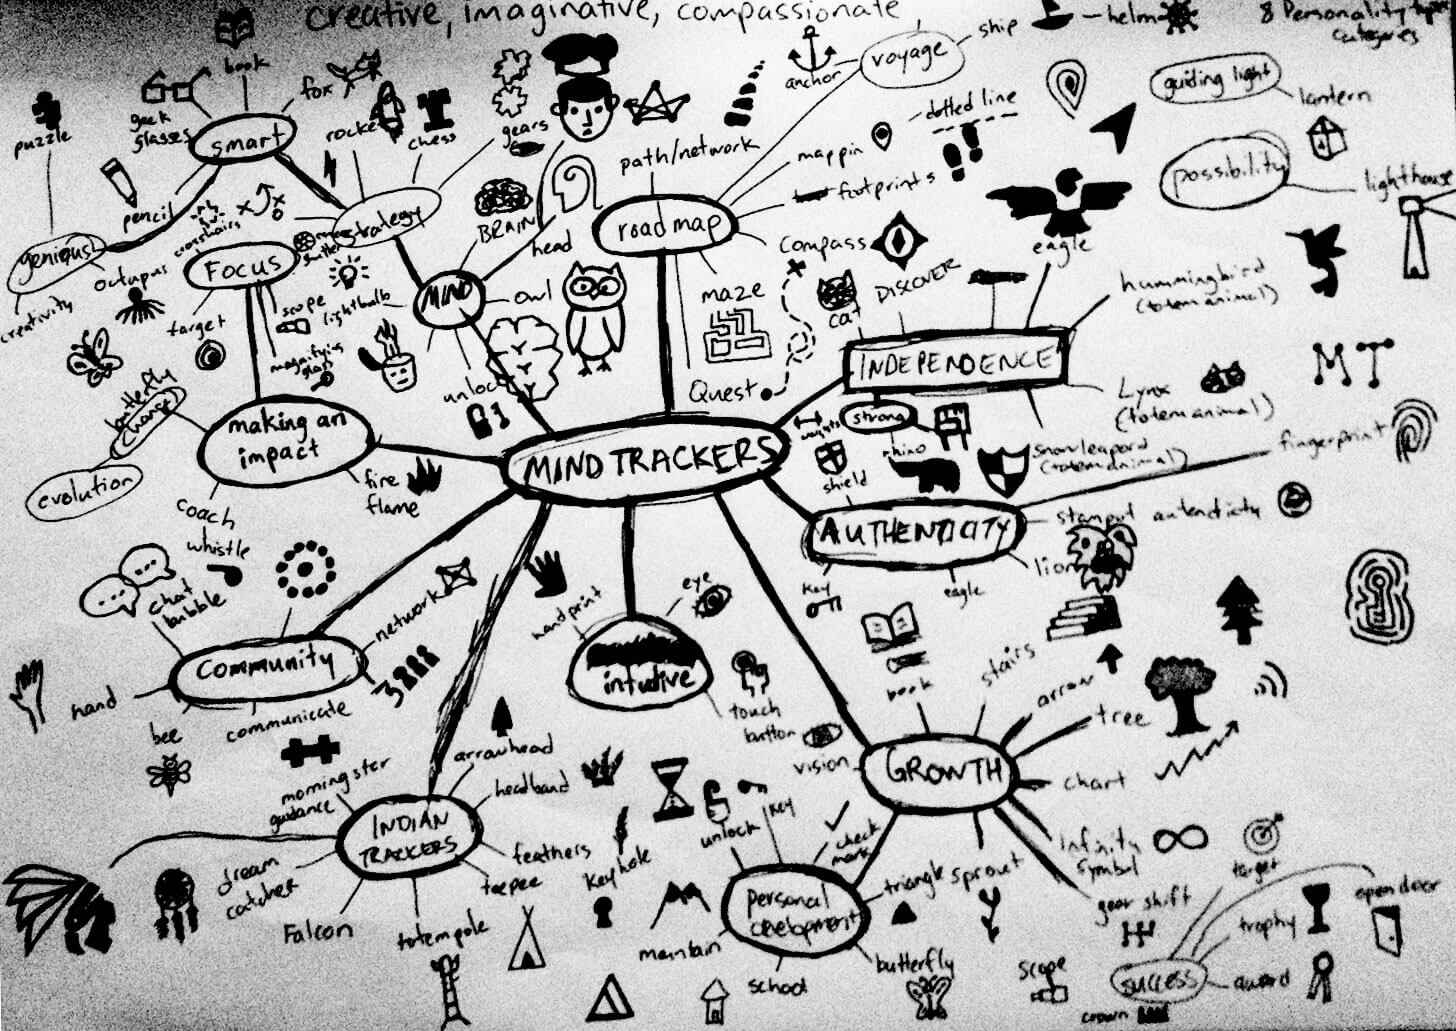 My initial Mind Map for the Mind Trackers logo